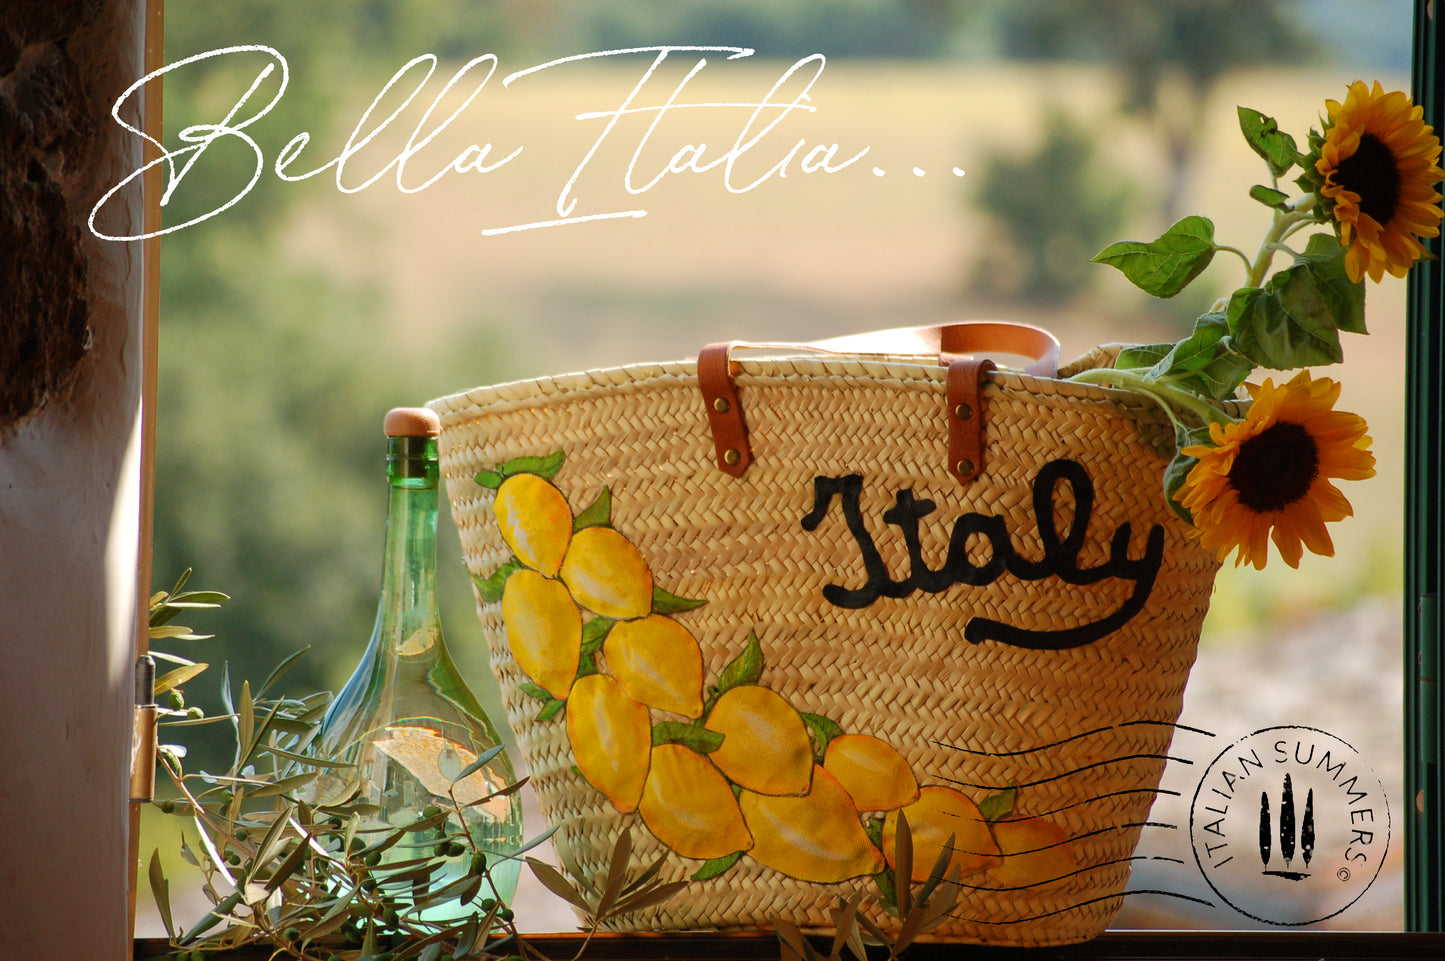 This large straw bag ITALY LEMONS with hand-painted Amalfi lemon appliques and an embroidered "Italy" quote. Designed and sold by Italian summers This straw bag is made to order.